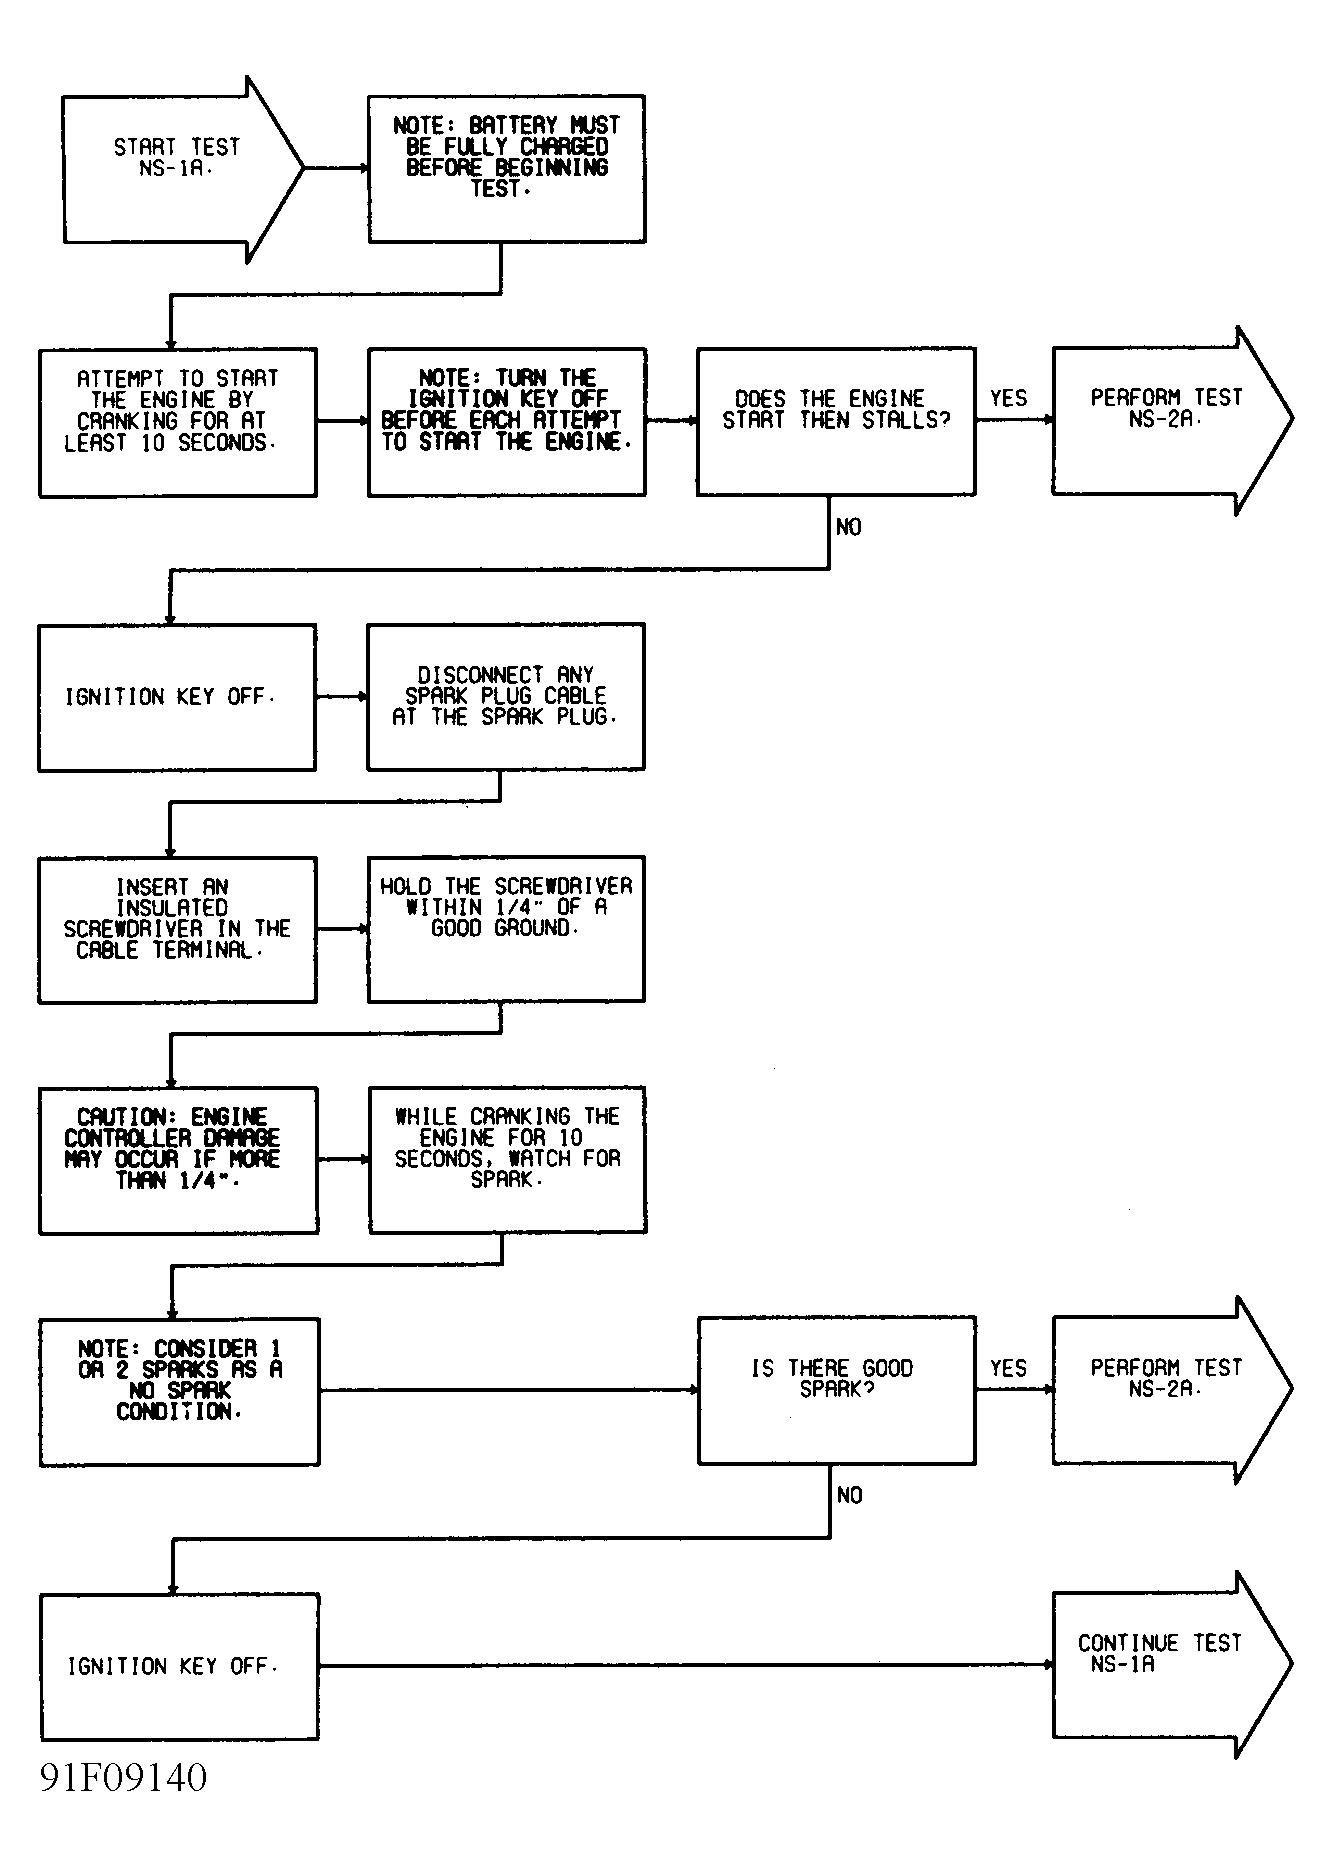 Chrysler Imperial 1991 - Component Locations -  Test NS-1A: Flowchart (1 of 4)